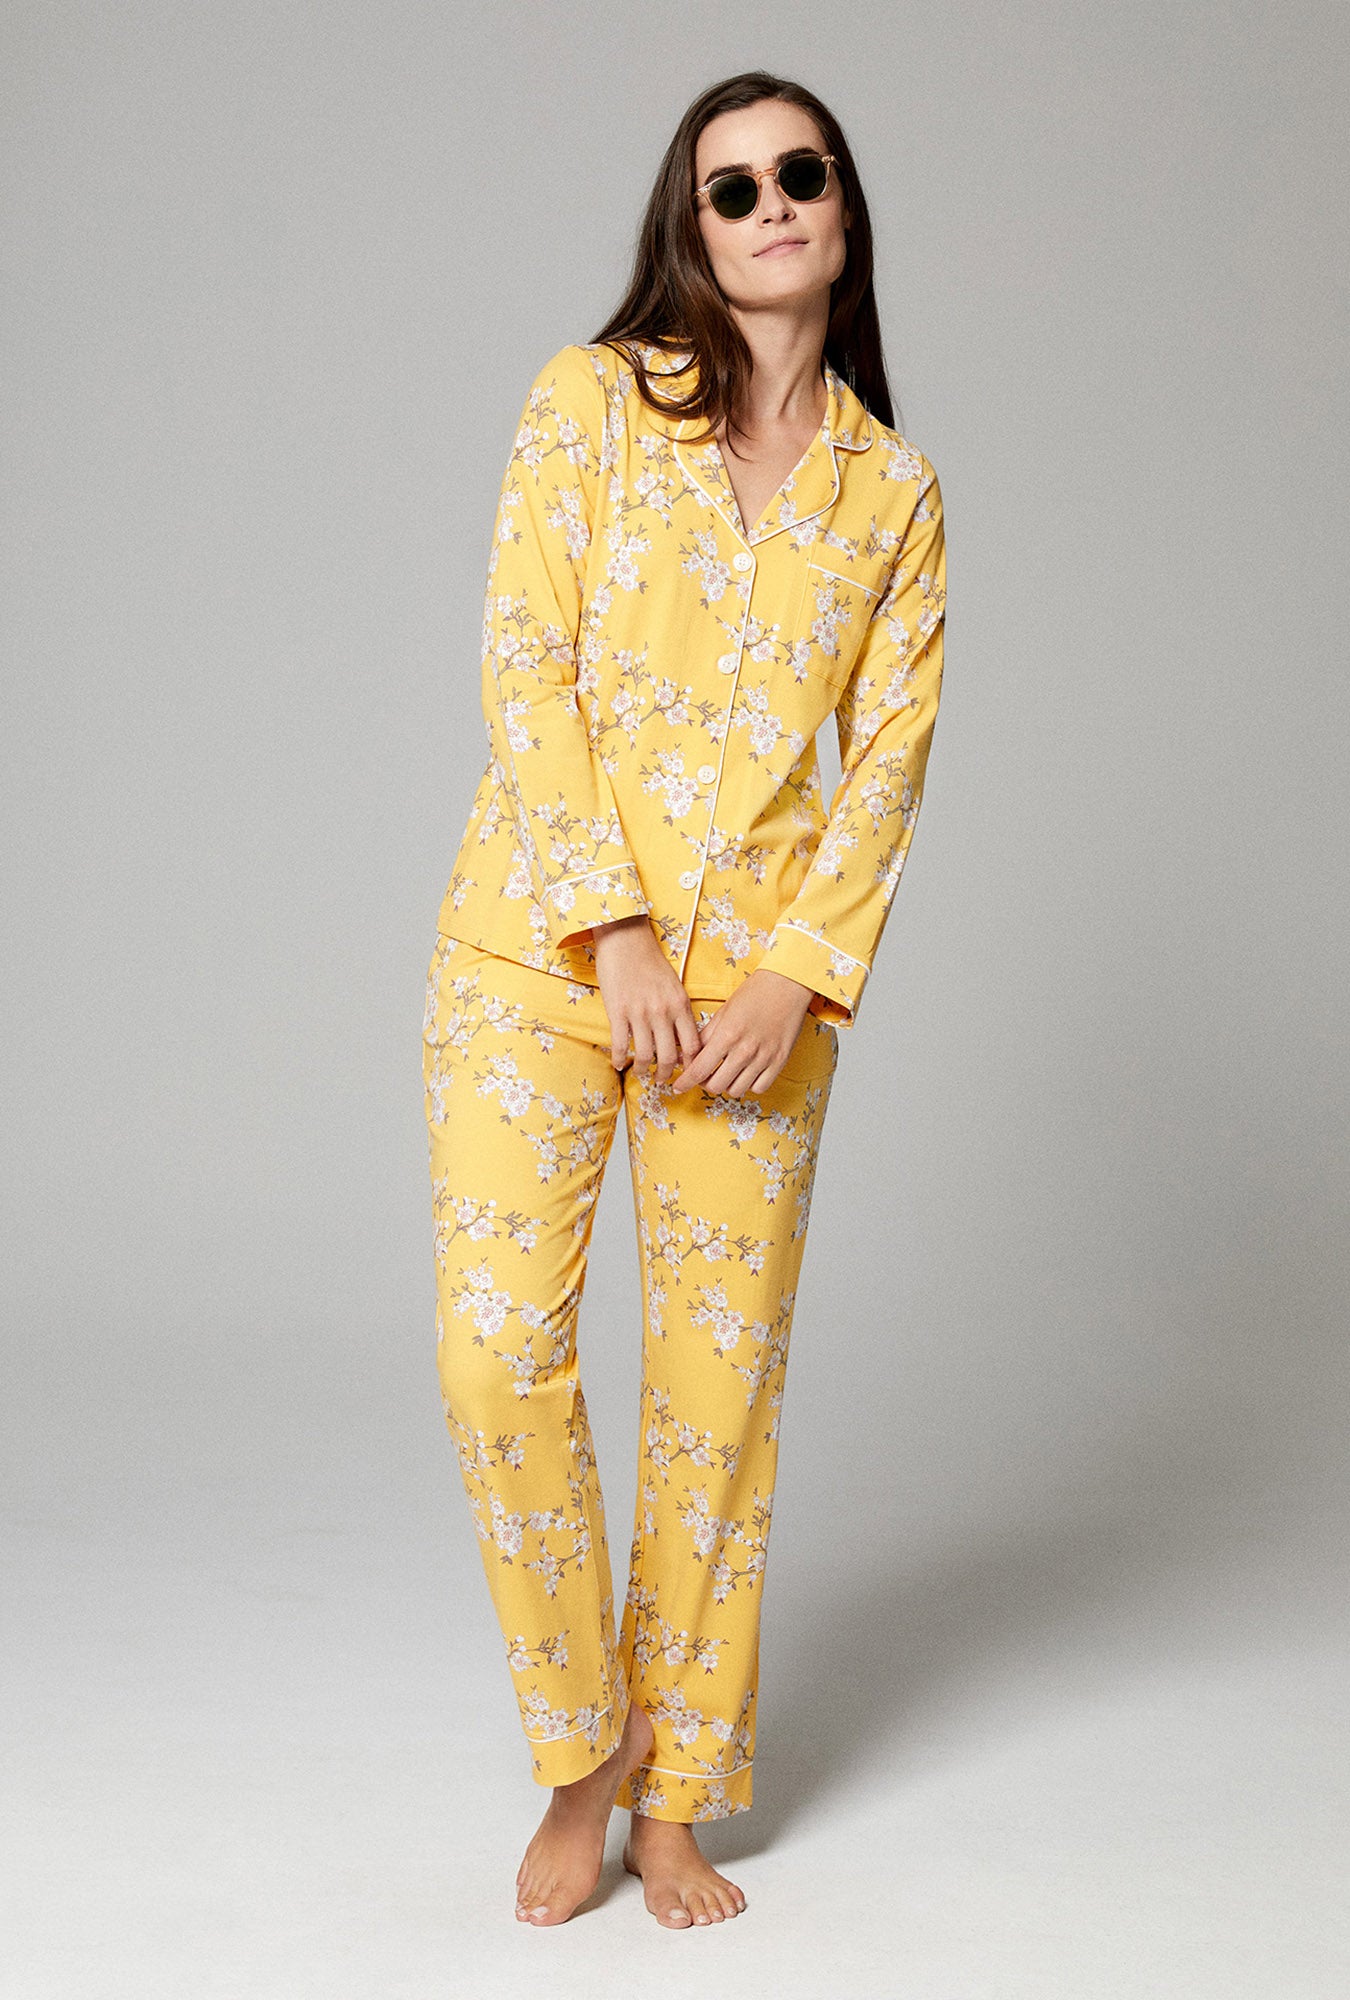 A lady wearing gold color long sleeve classic pj set with a floral print